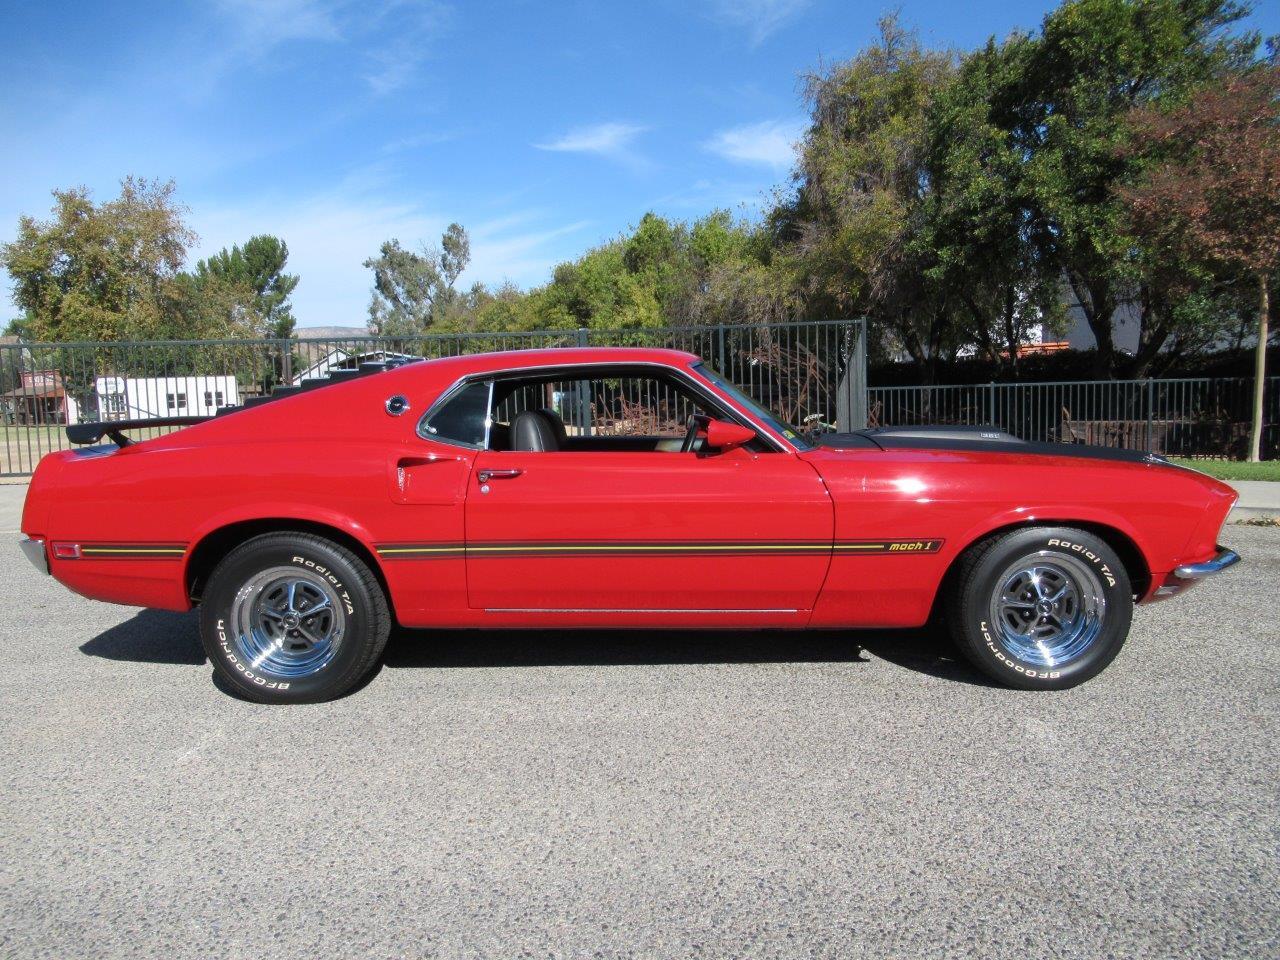 1969 Ford Mustang Mach 1 for sale in Simi Valley, CA / classiccarsbay.com